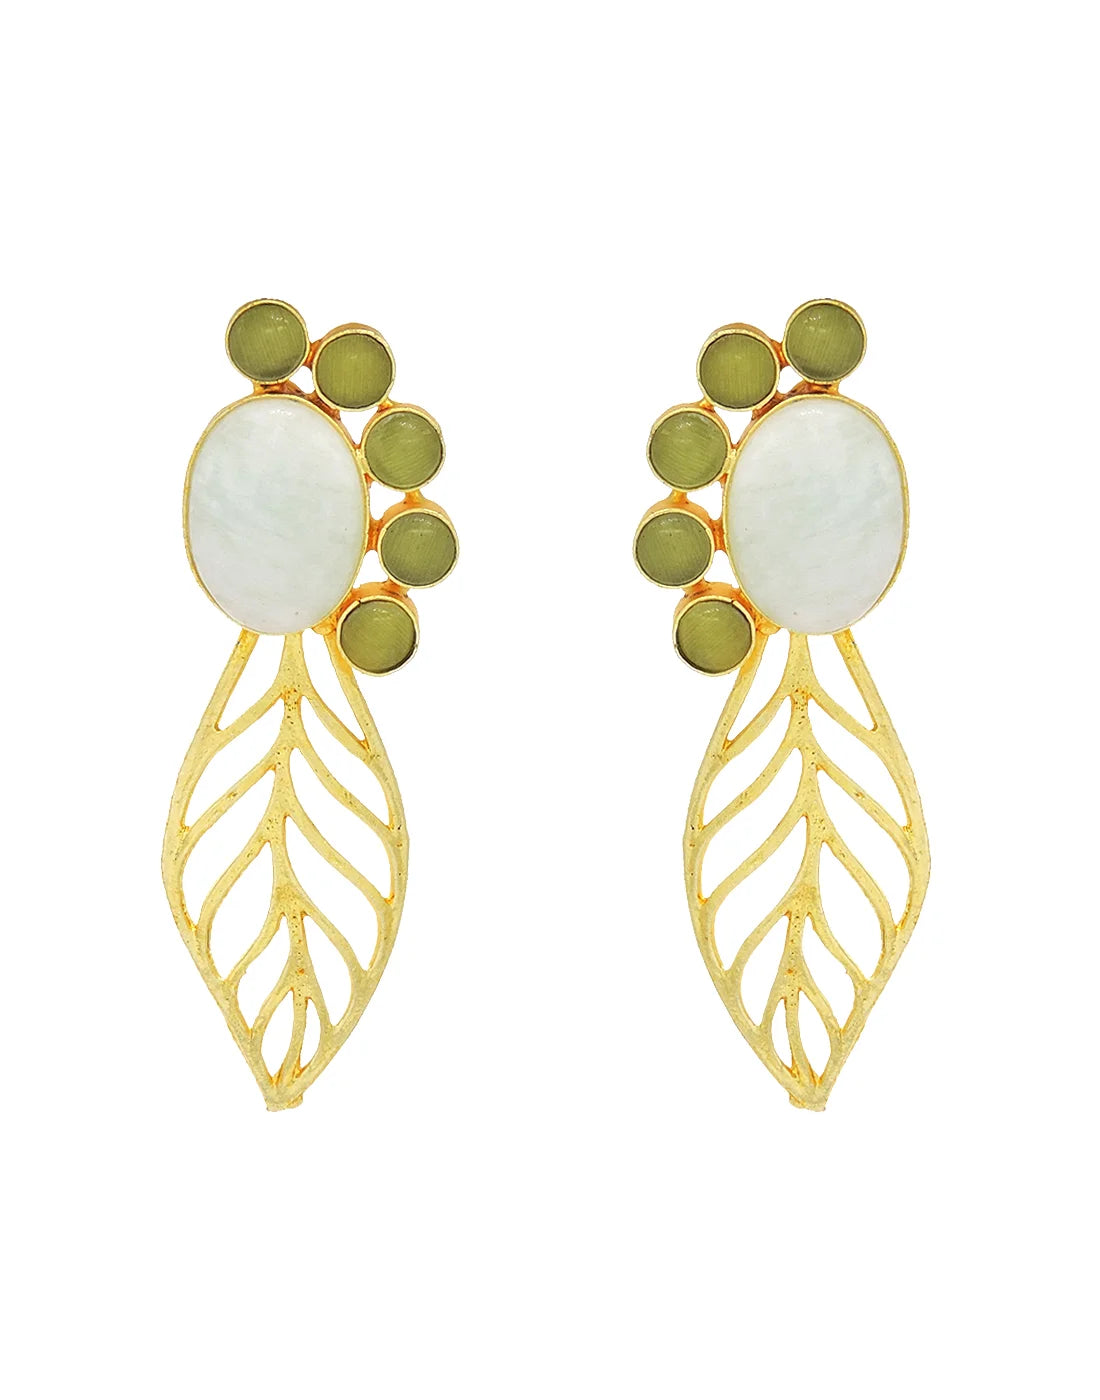 Glass & Pearl Leaf Earrings (Green)- Handcrafted Jewellery from Dori